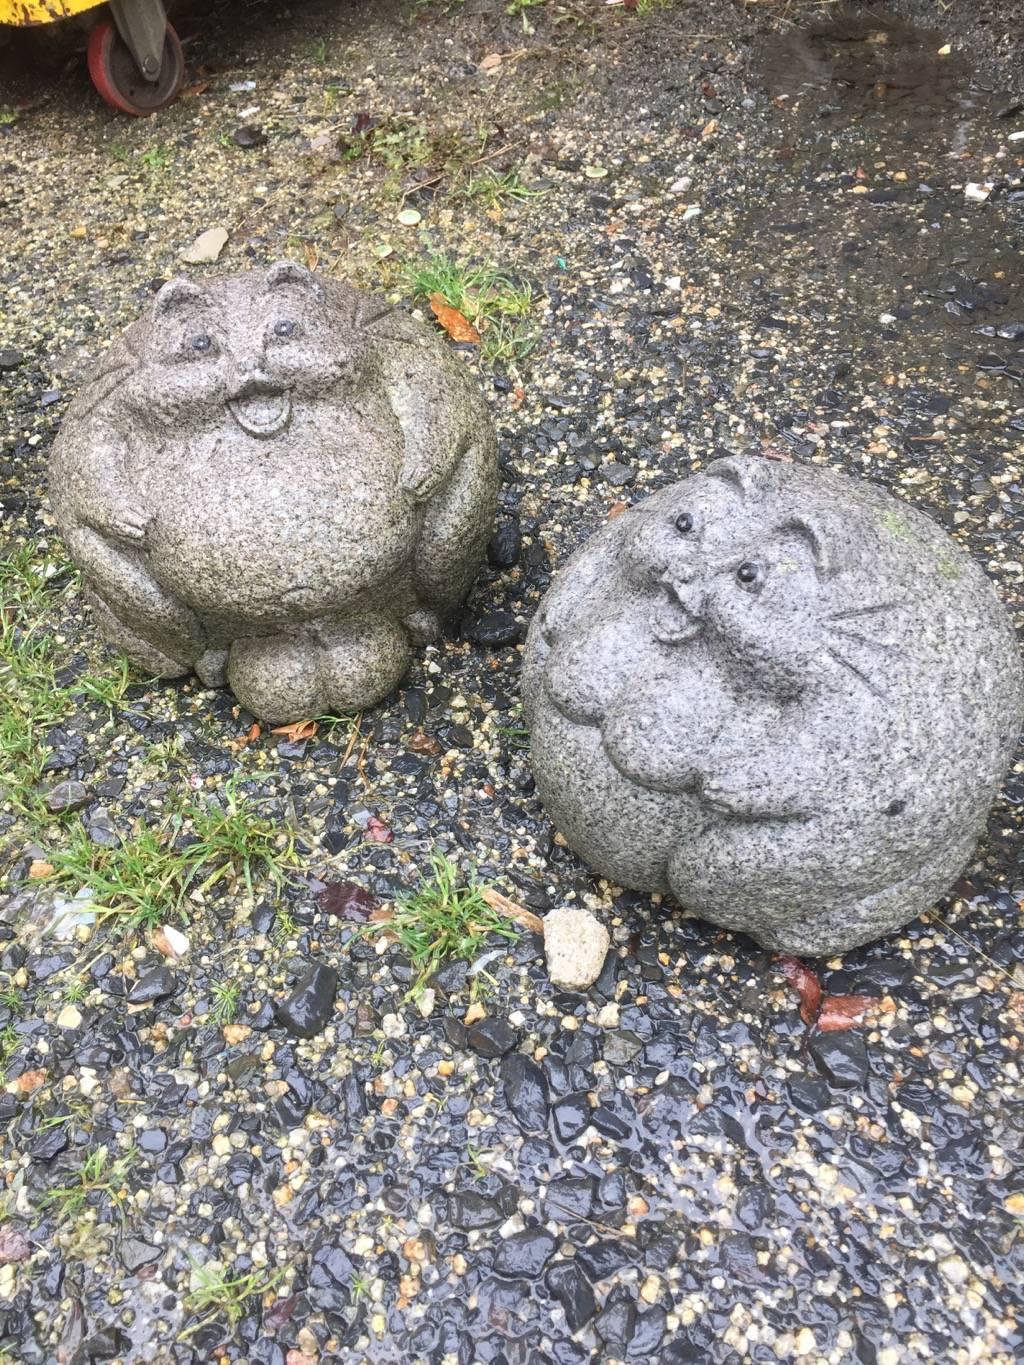 Japan, this charming and unusual pair of male and female round hand carved granite stone folk art tanuki (a Folk Art hero raccoon dog/ Tanuki) await placement in your favourite garden place or indoor space!

Tanuki is a noted sake loving party